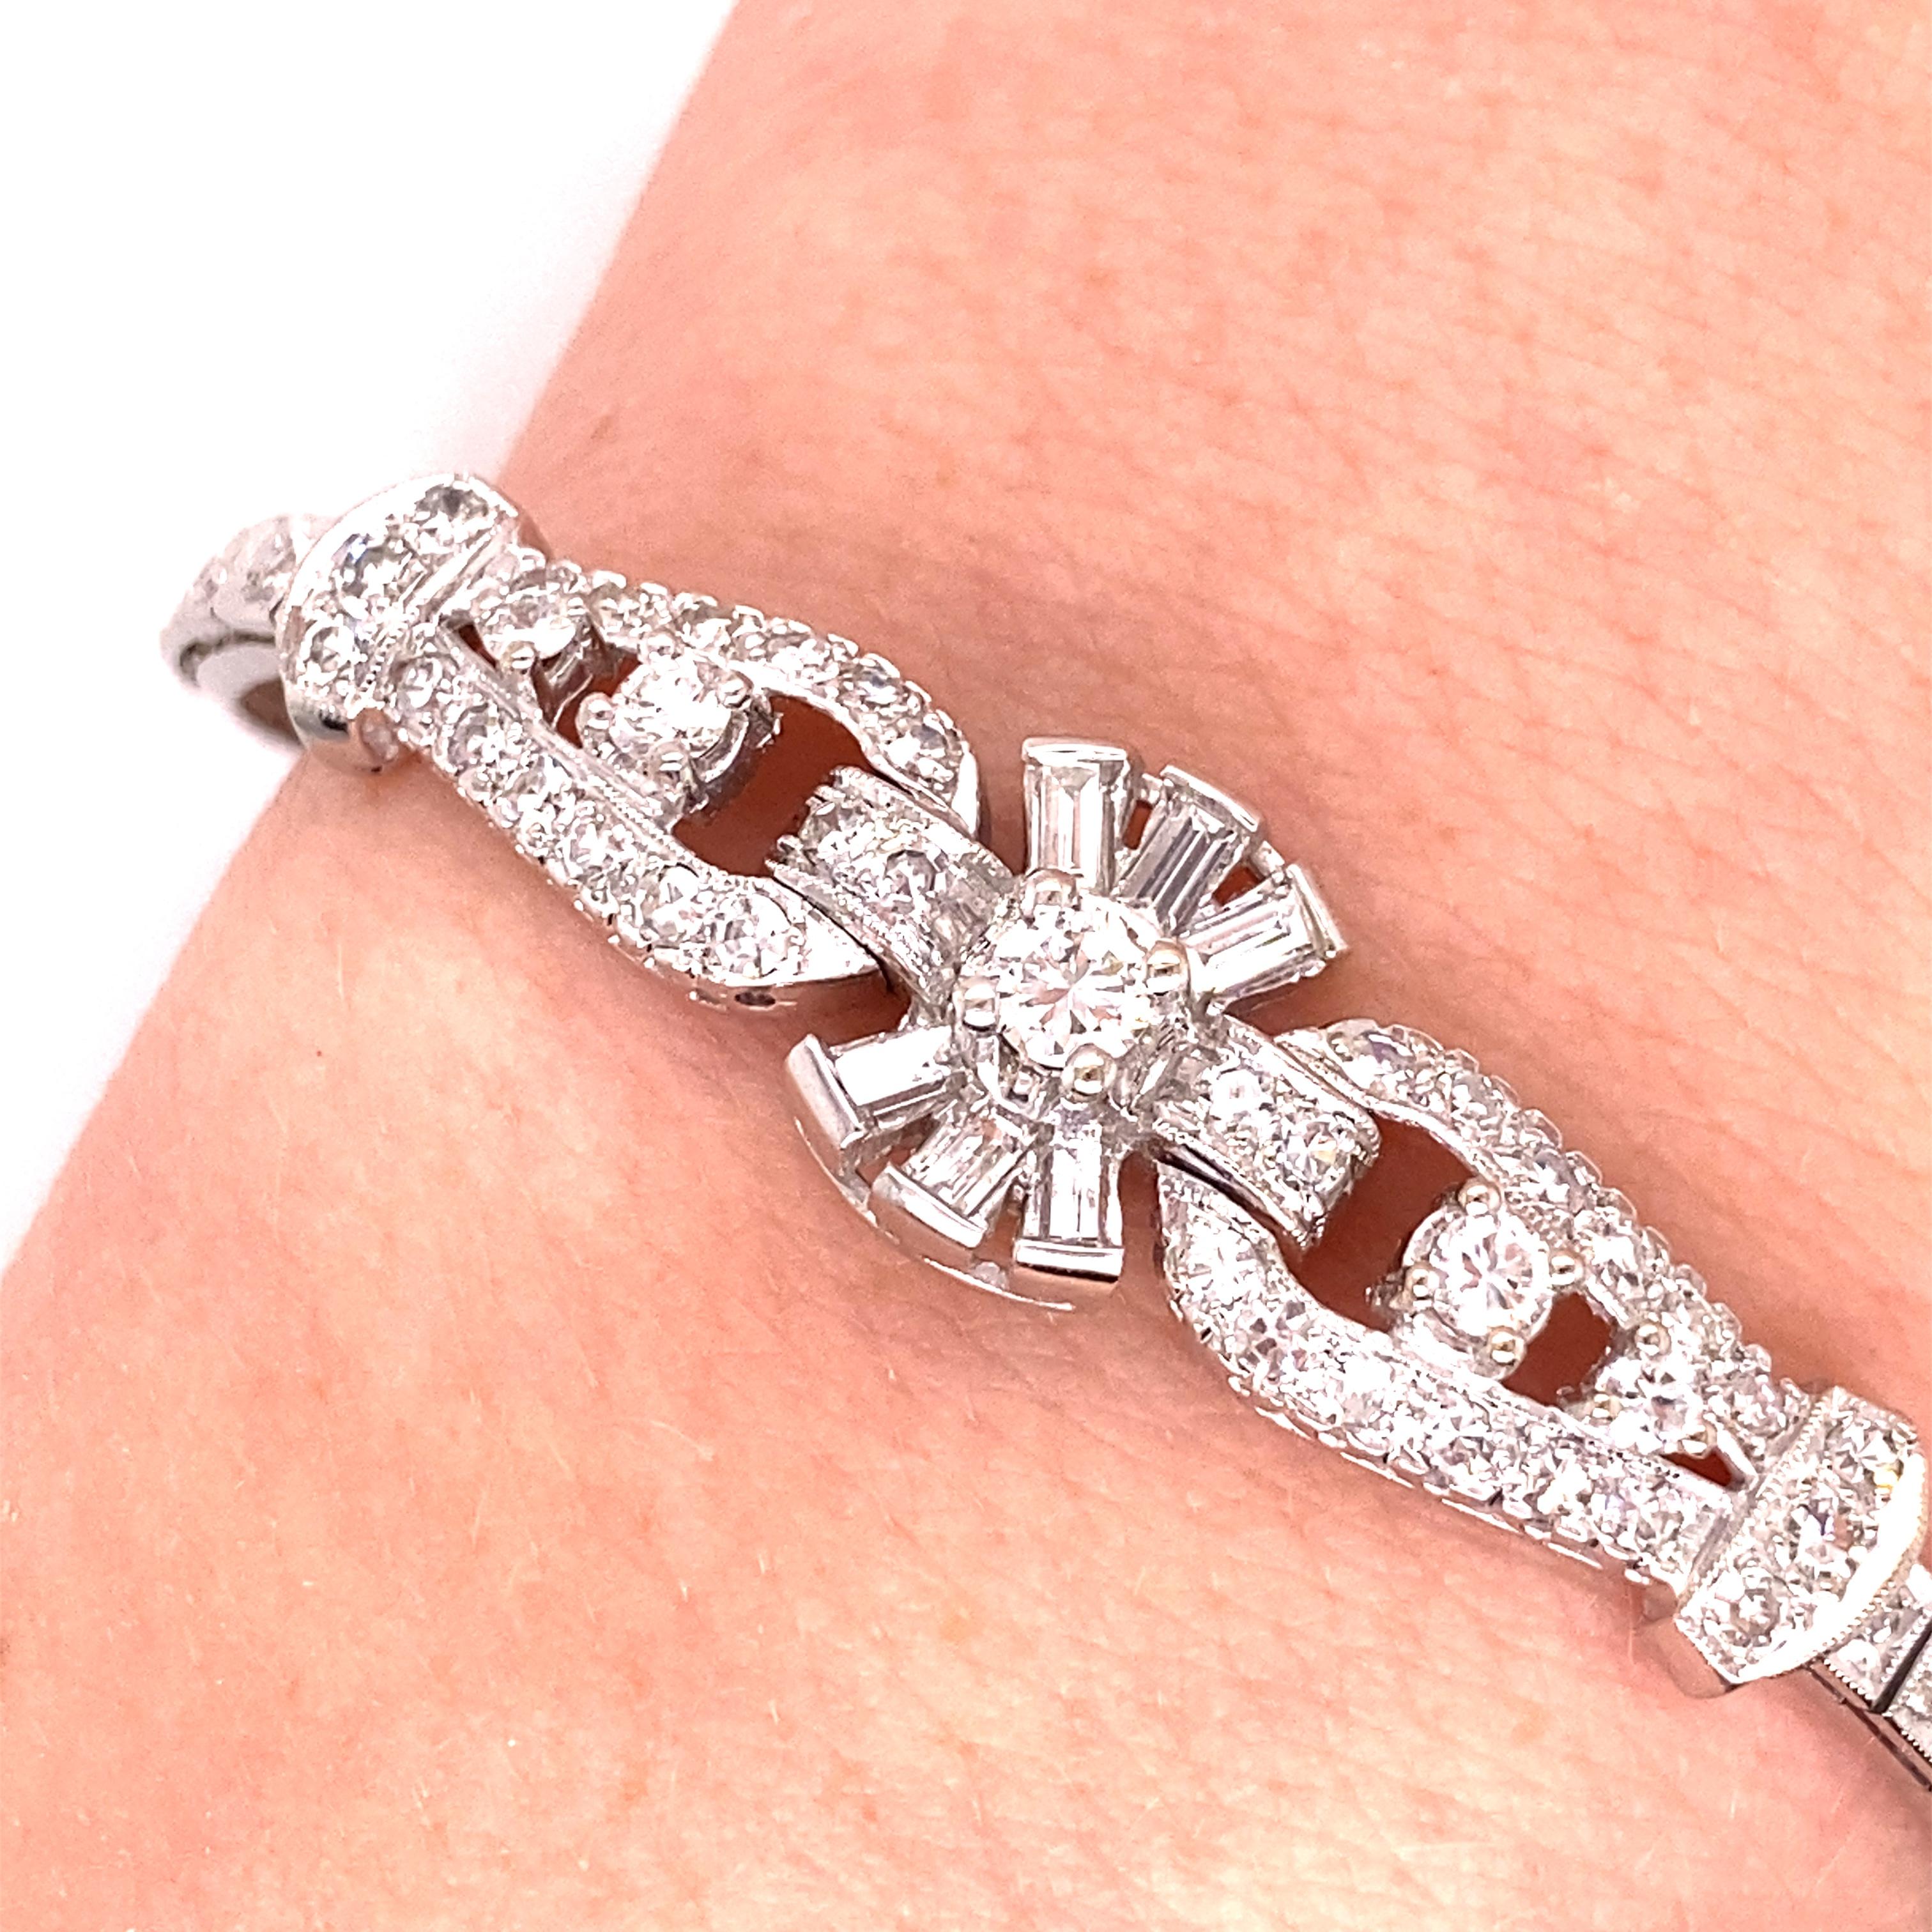 Vintage 1950's 14K White Gold Diamond with Baguettes Bracelet 2.25ct - The bracelet contains 75 round full cut and single cut diamonds and 6 baguette diamonds for a total approximate weight of 2.25ct. The diamonds are G-H color and VS-SI clarity.